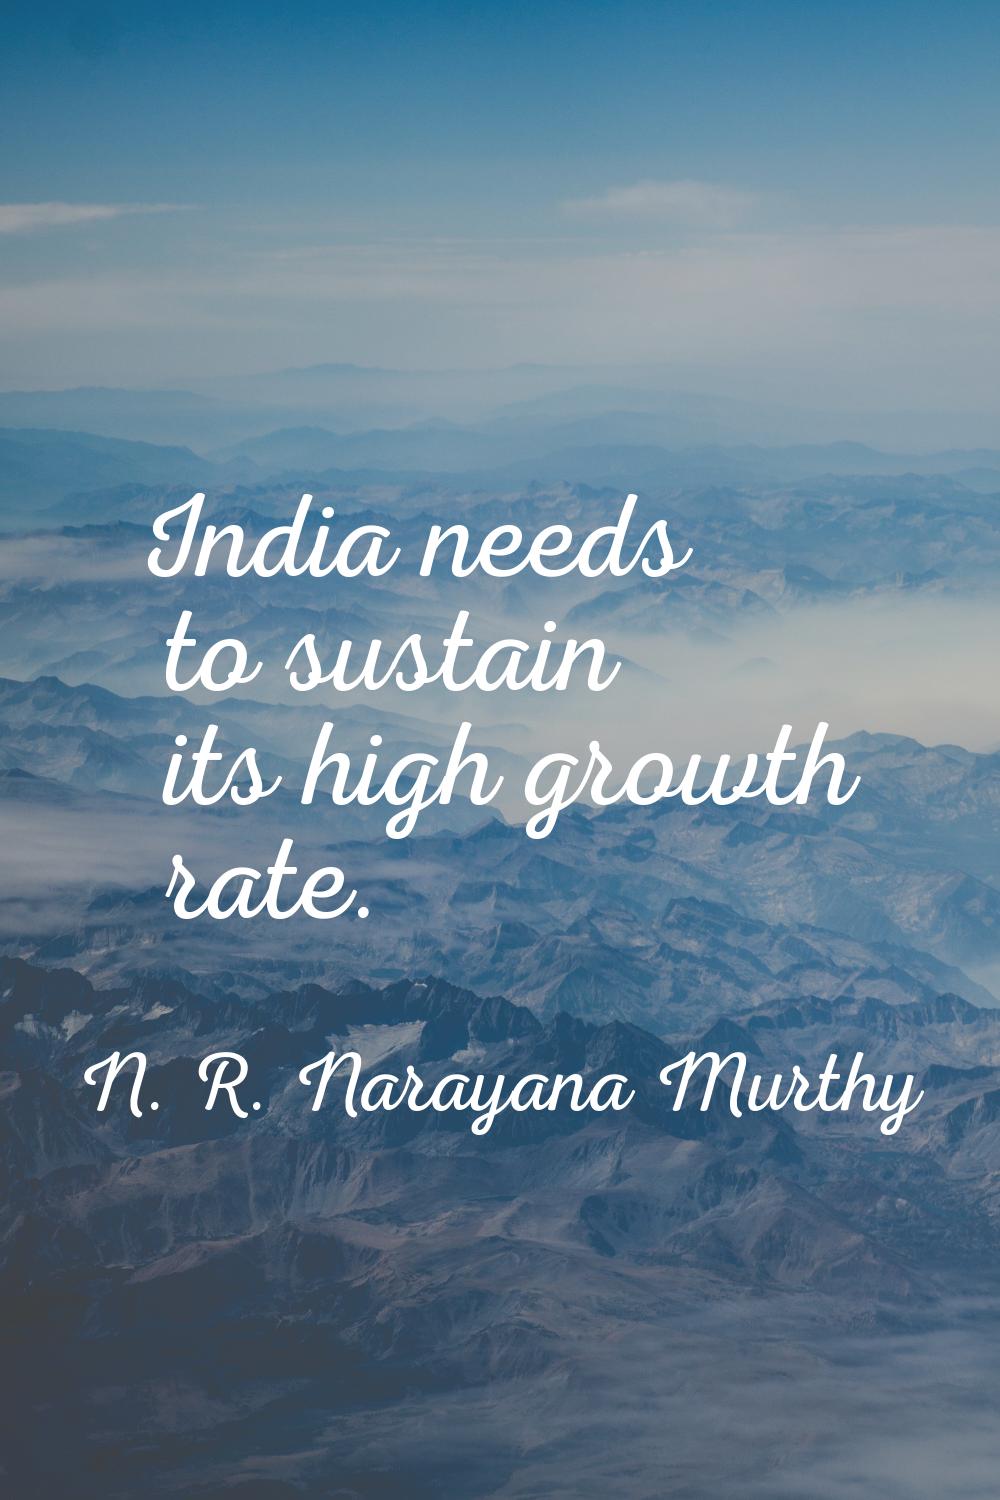 India needs to sustain its high growth rate.